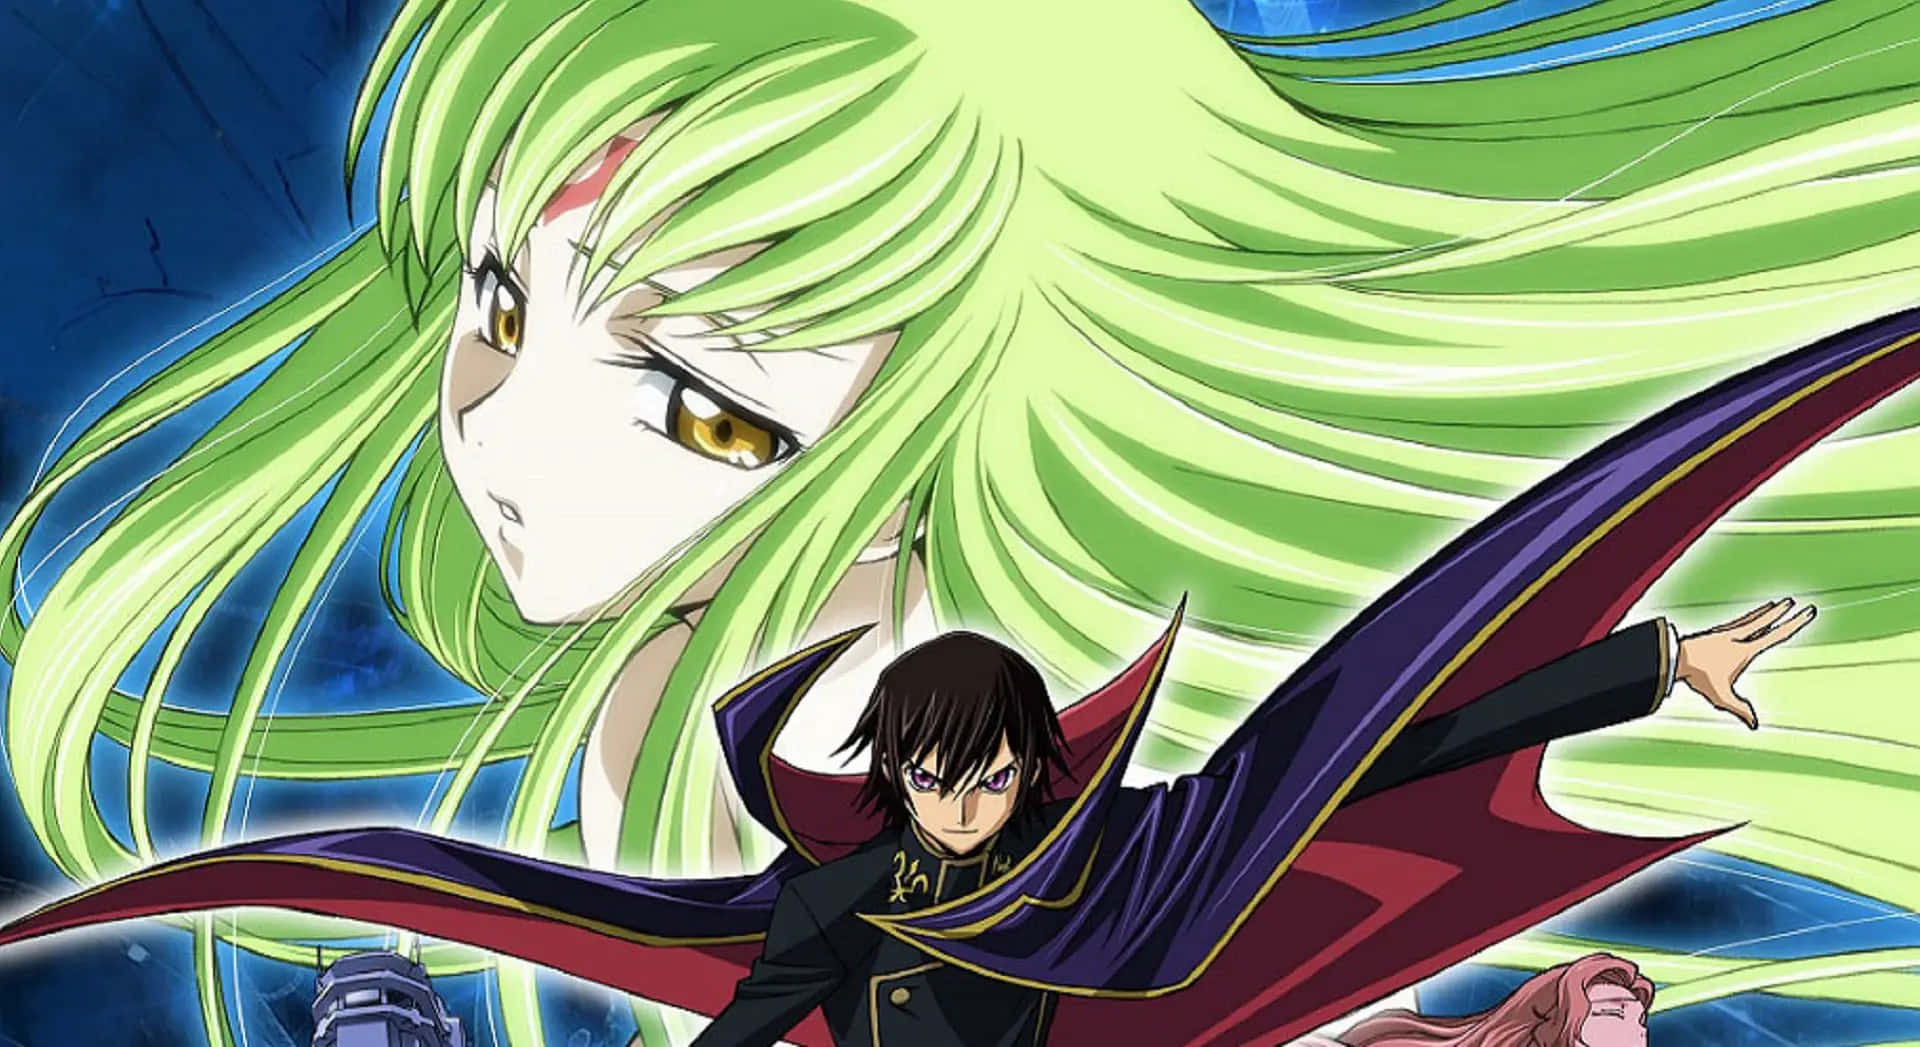 Conquer the world with the power of Geass